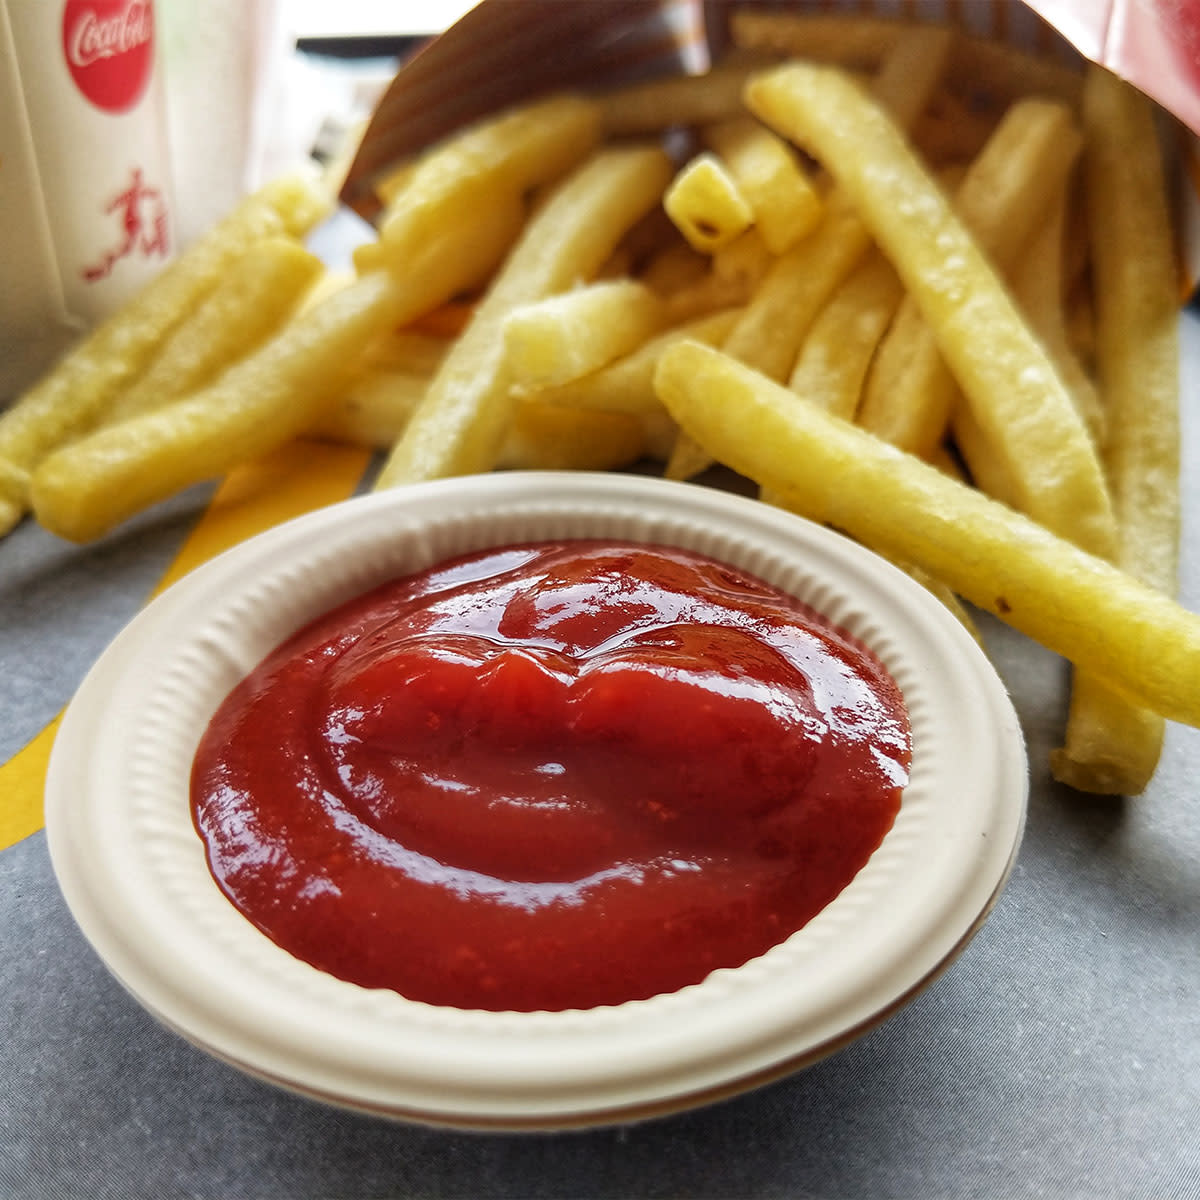 McDonald's french fries with ketchup